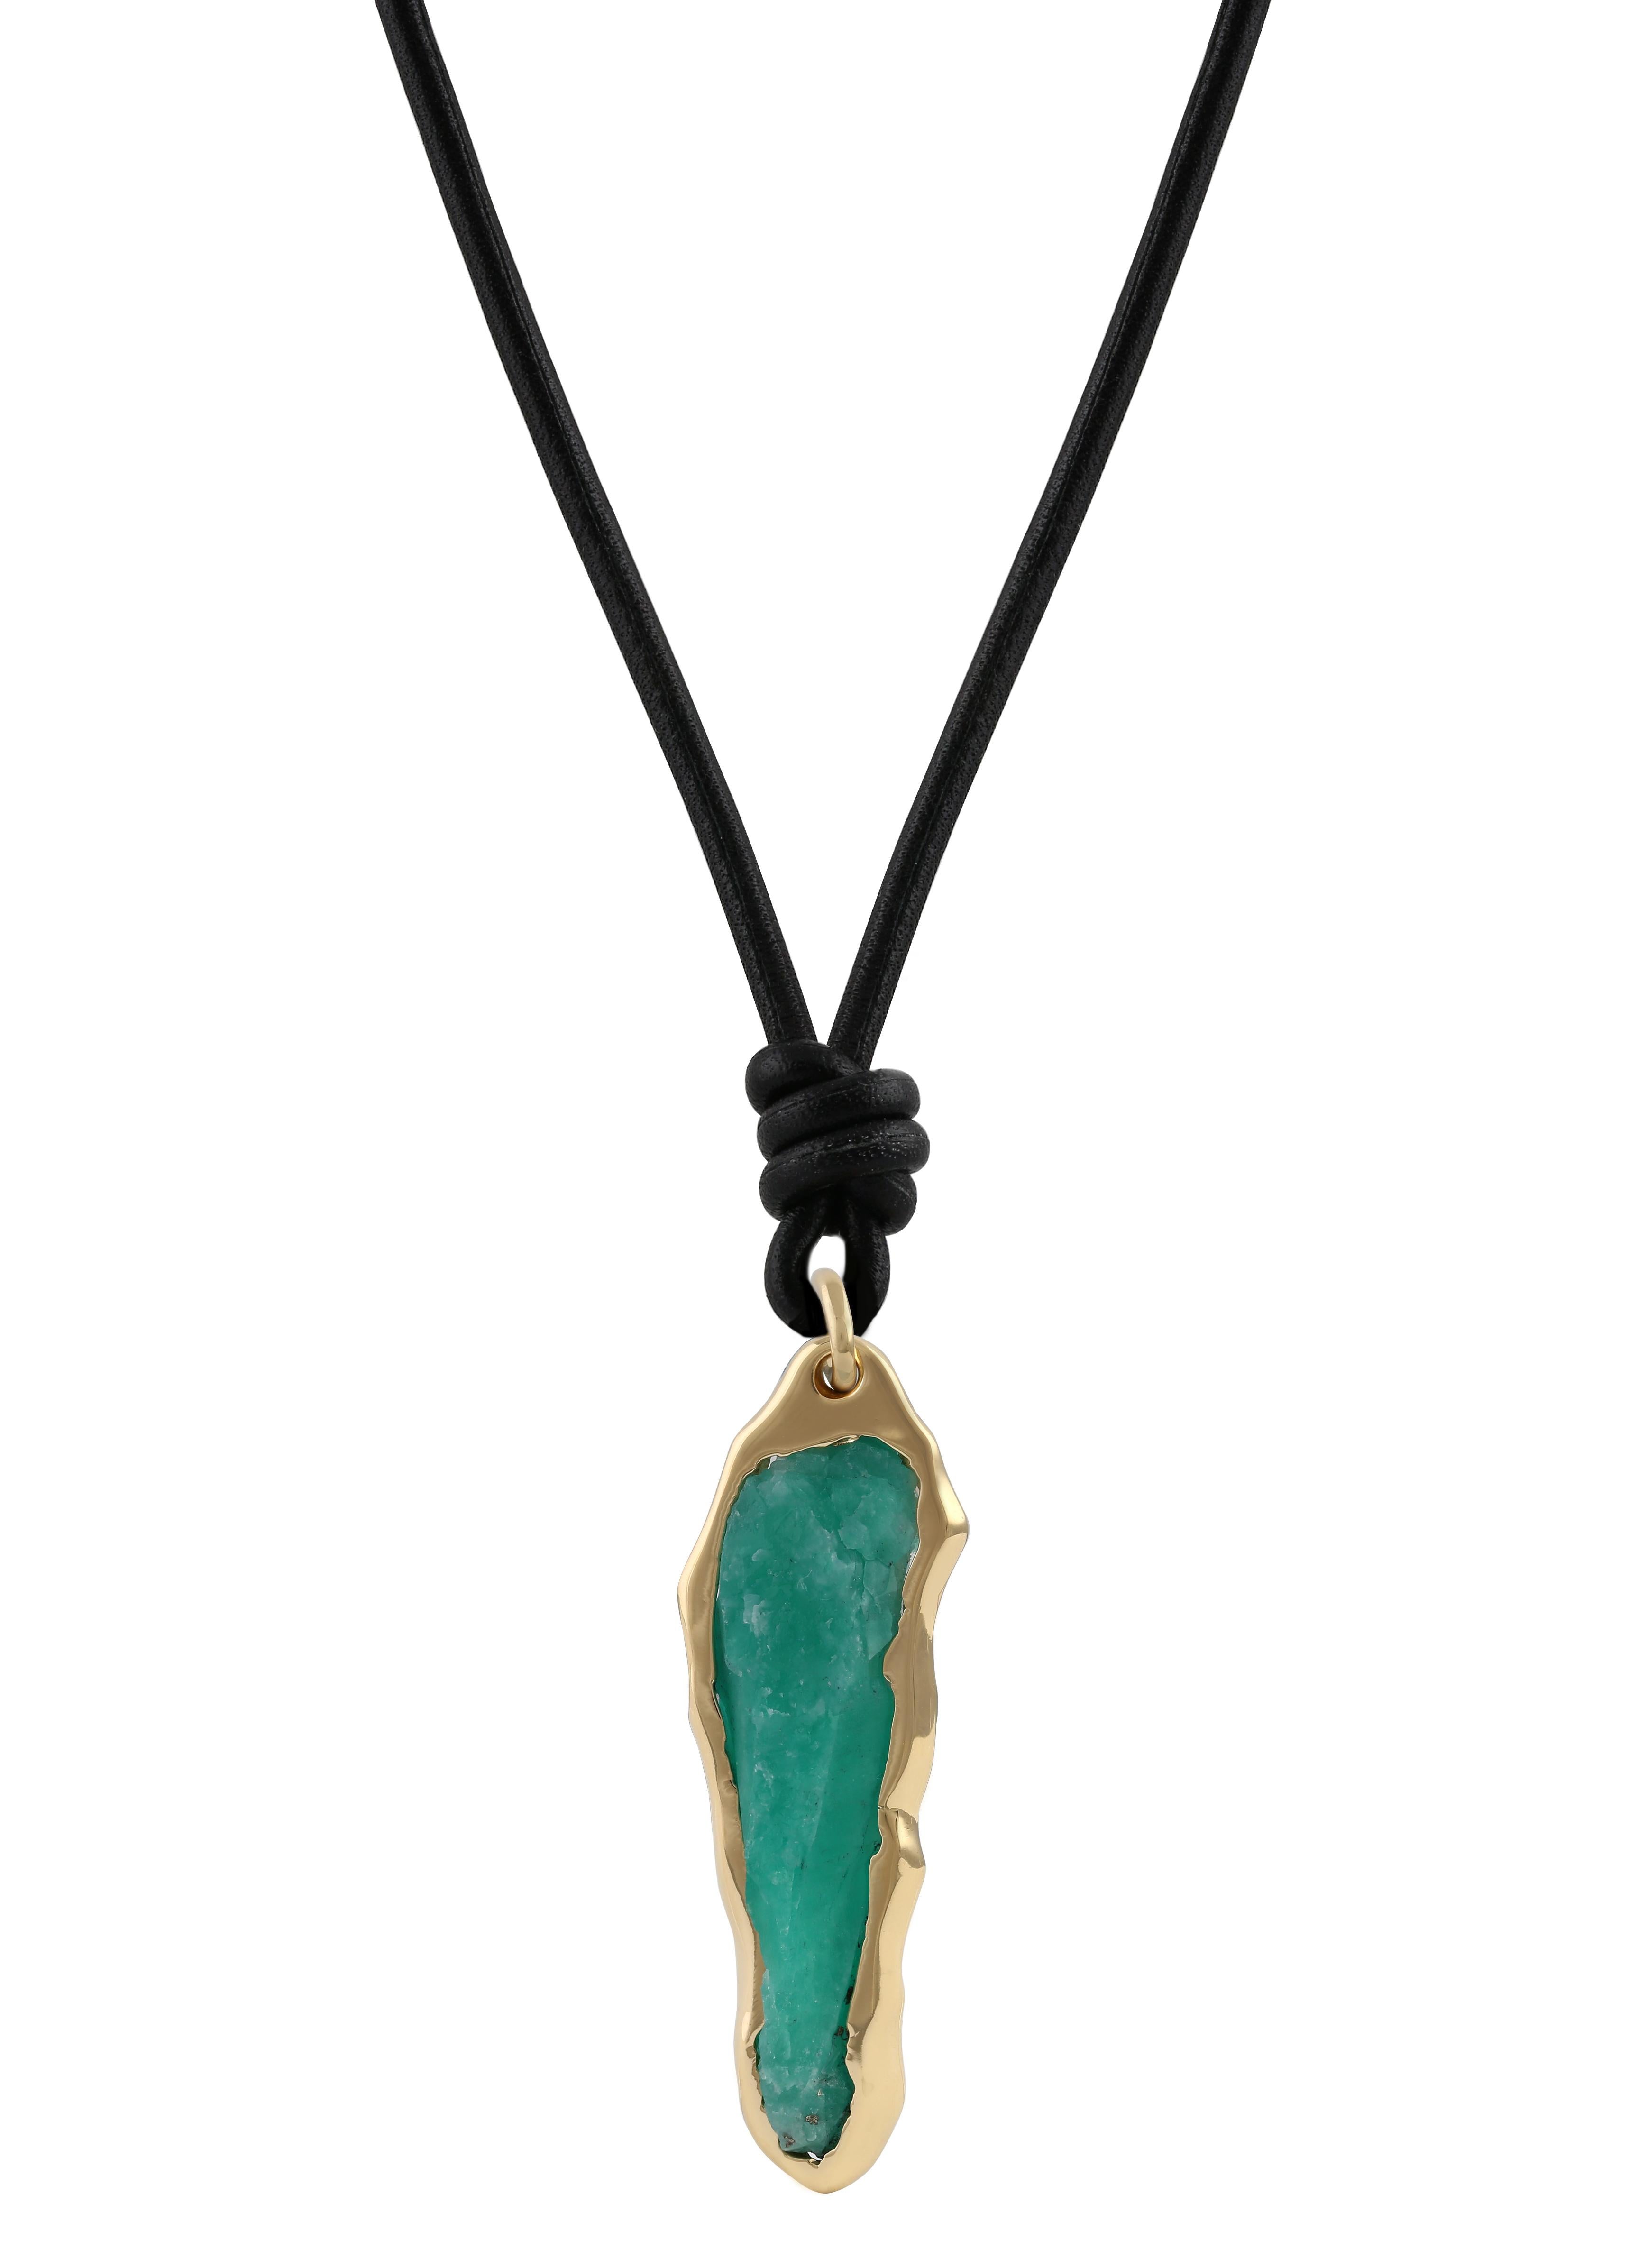 A collection of magnificent rough emeralds from Columbia, set within a subtle melted bezel setting, allowing the full beauty of the stone to be appreciated from nearly all angles. The yellow gold colour compliments the green of the emerald, making